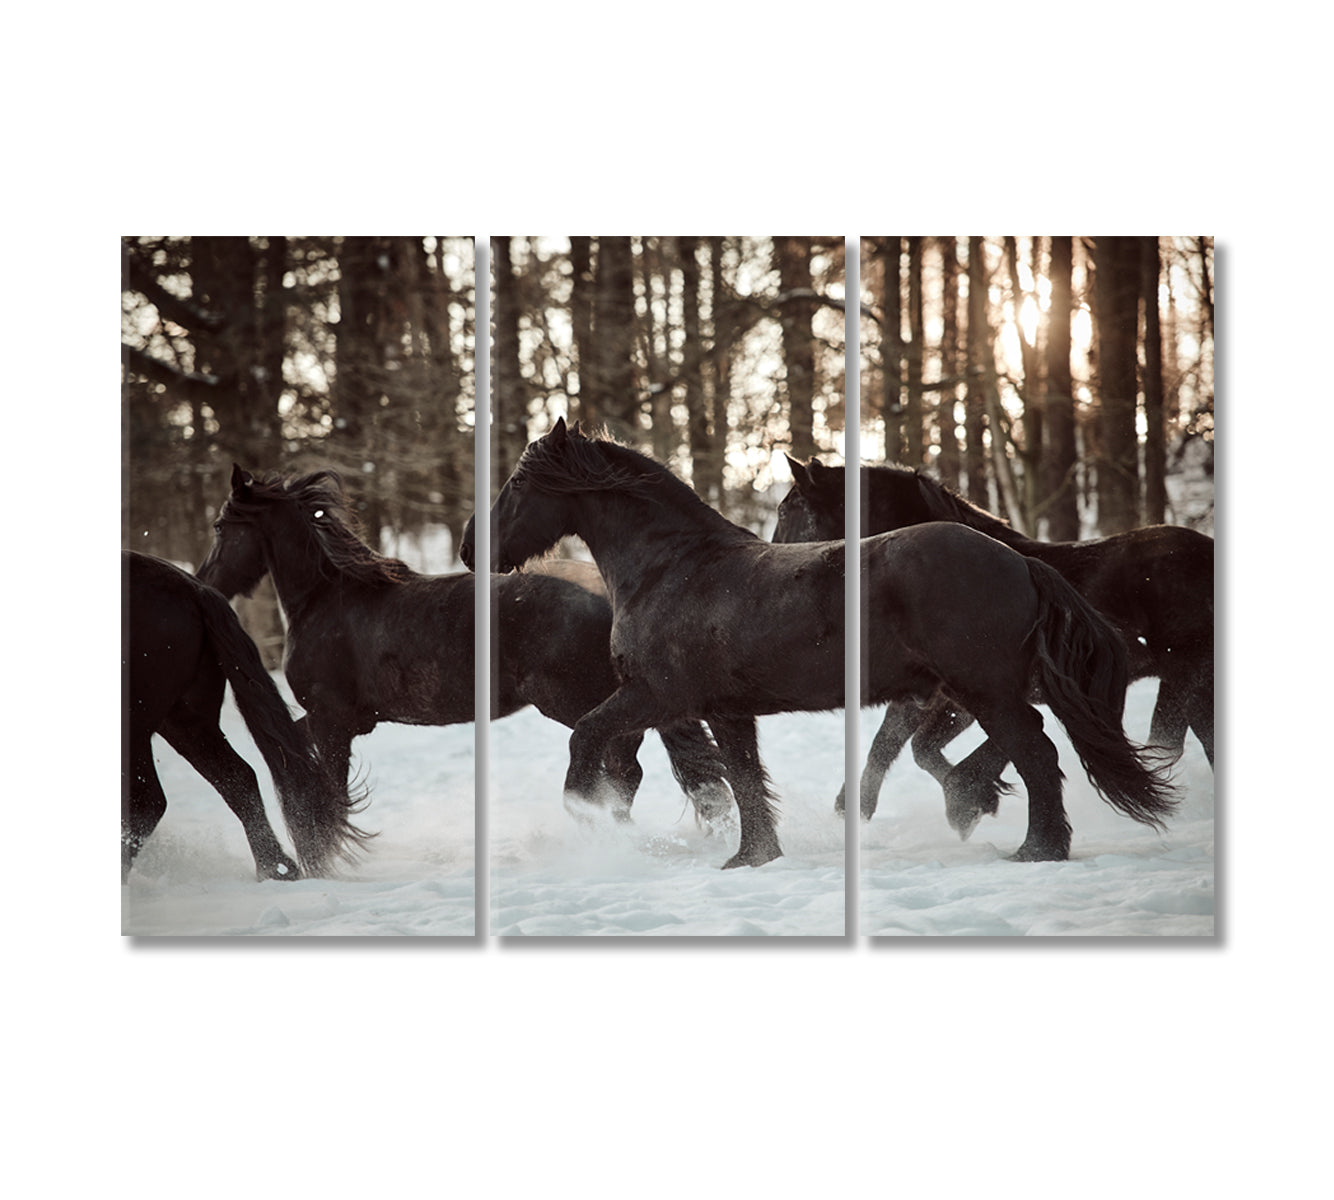 Friesian Horses Running in Winter Forest Canvas Print-Canvas Print-CetArt-3 Panels-36x24 inches-CetArt